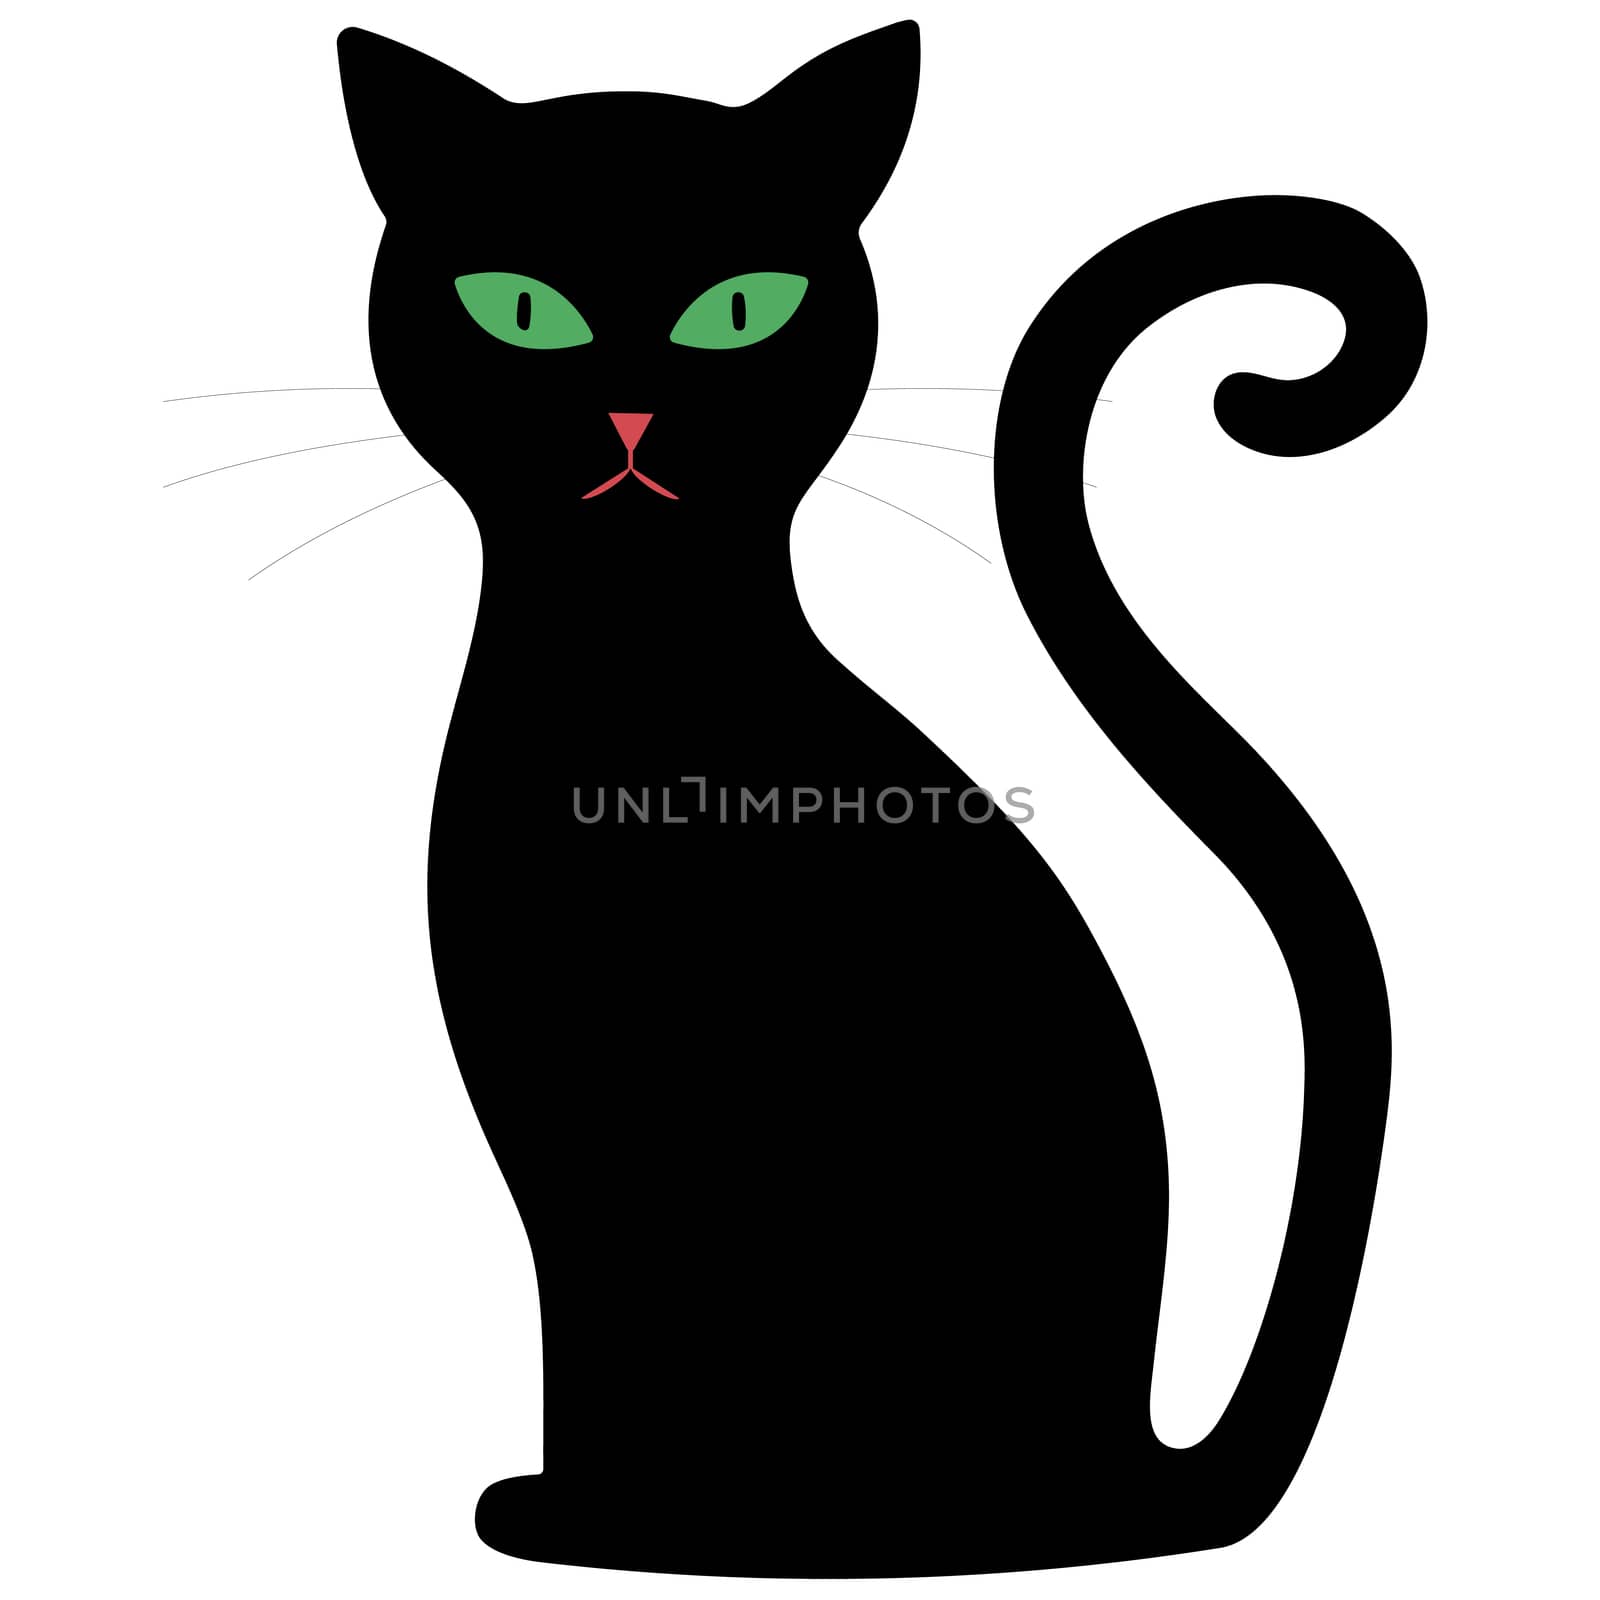 Black cat with green eyes on a white background